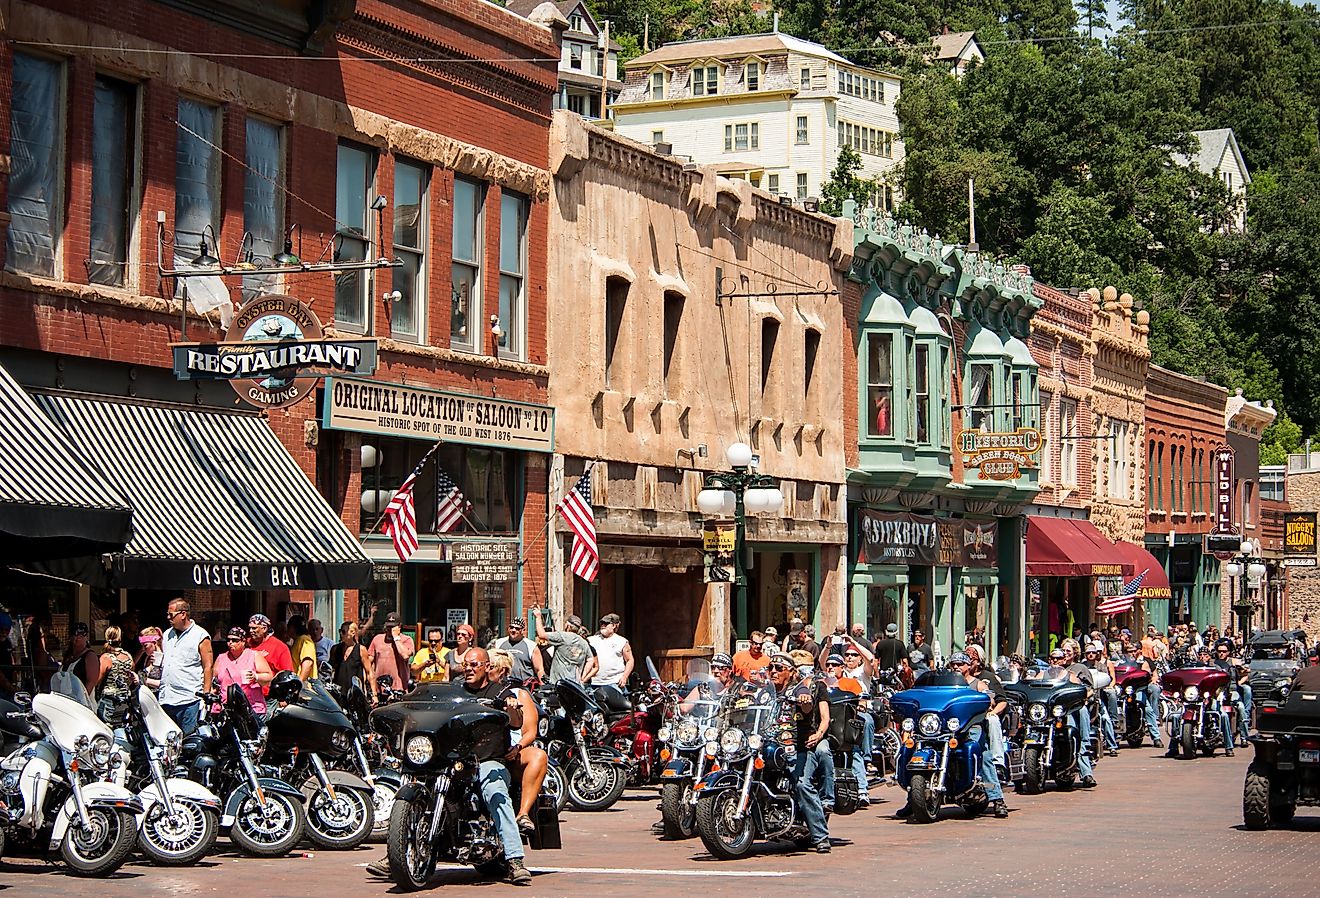 Downtown Sturgis, South Dakota during the annual rally for bikers. Image credit Photostravellers via Shutterstock